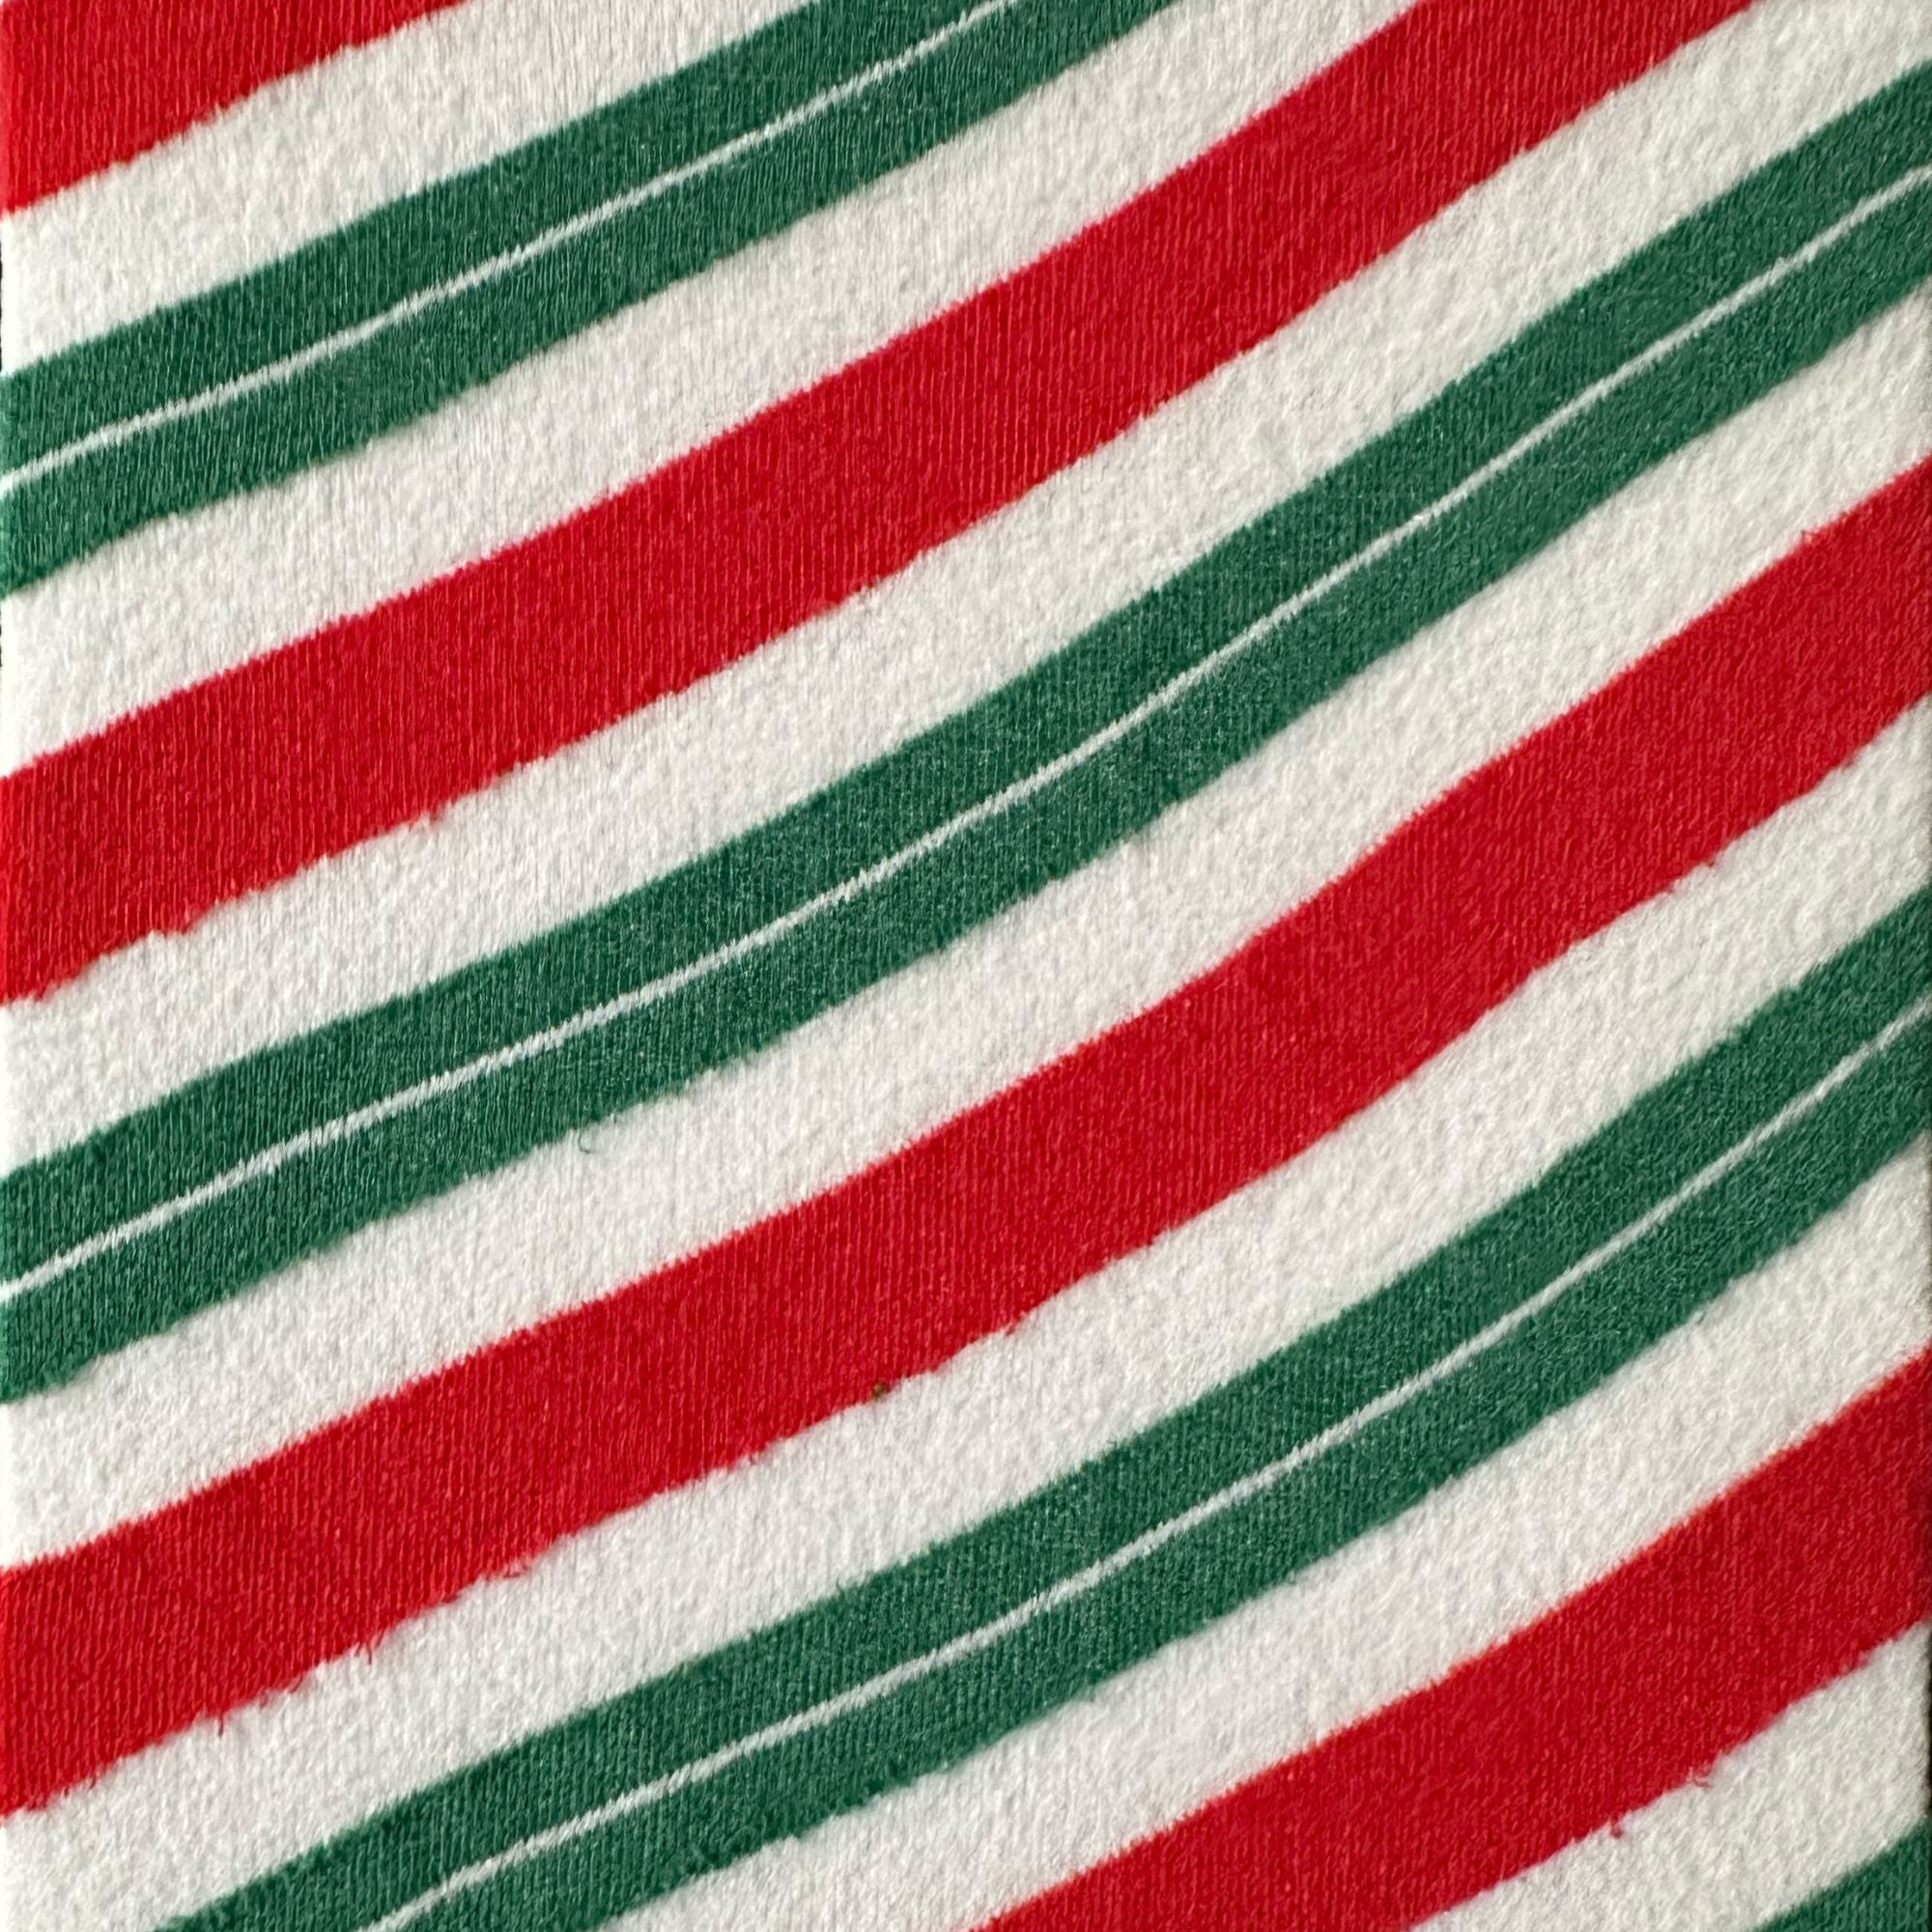 Layered Striped Red, Green & White Tights - The Best Christmas